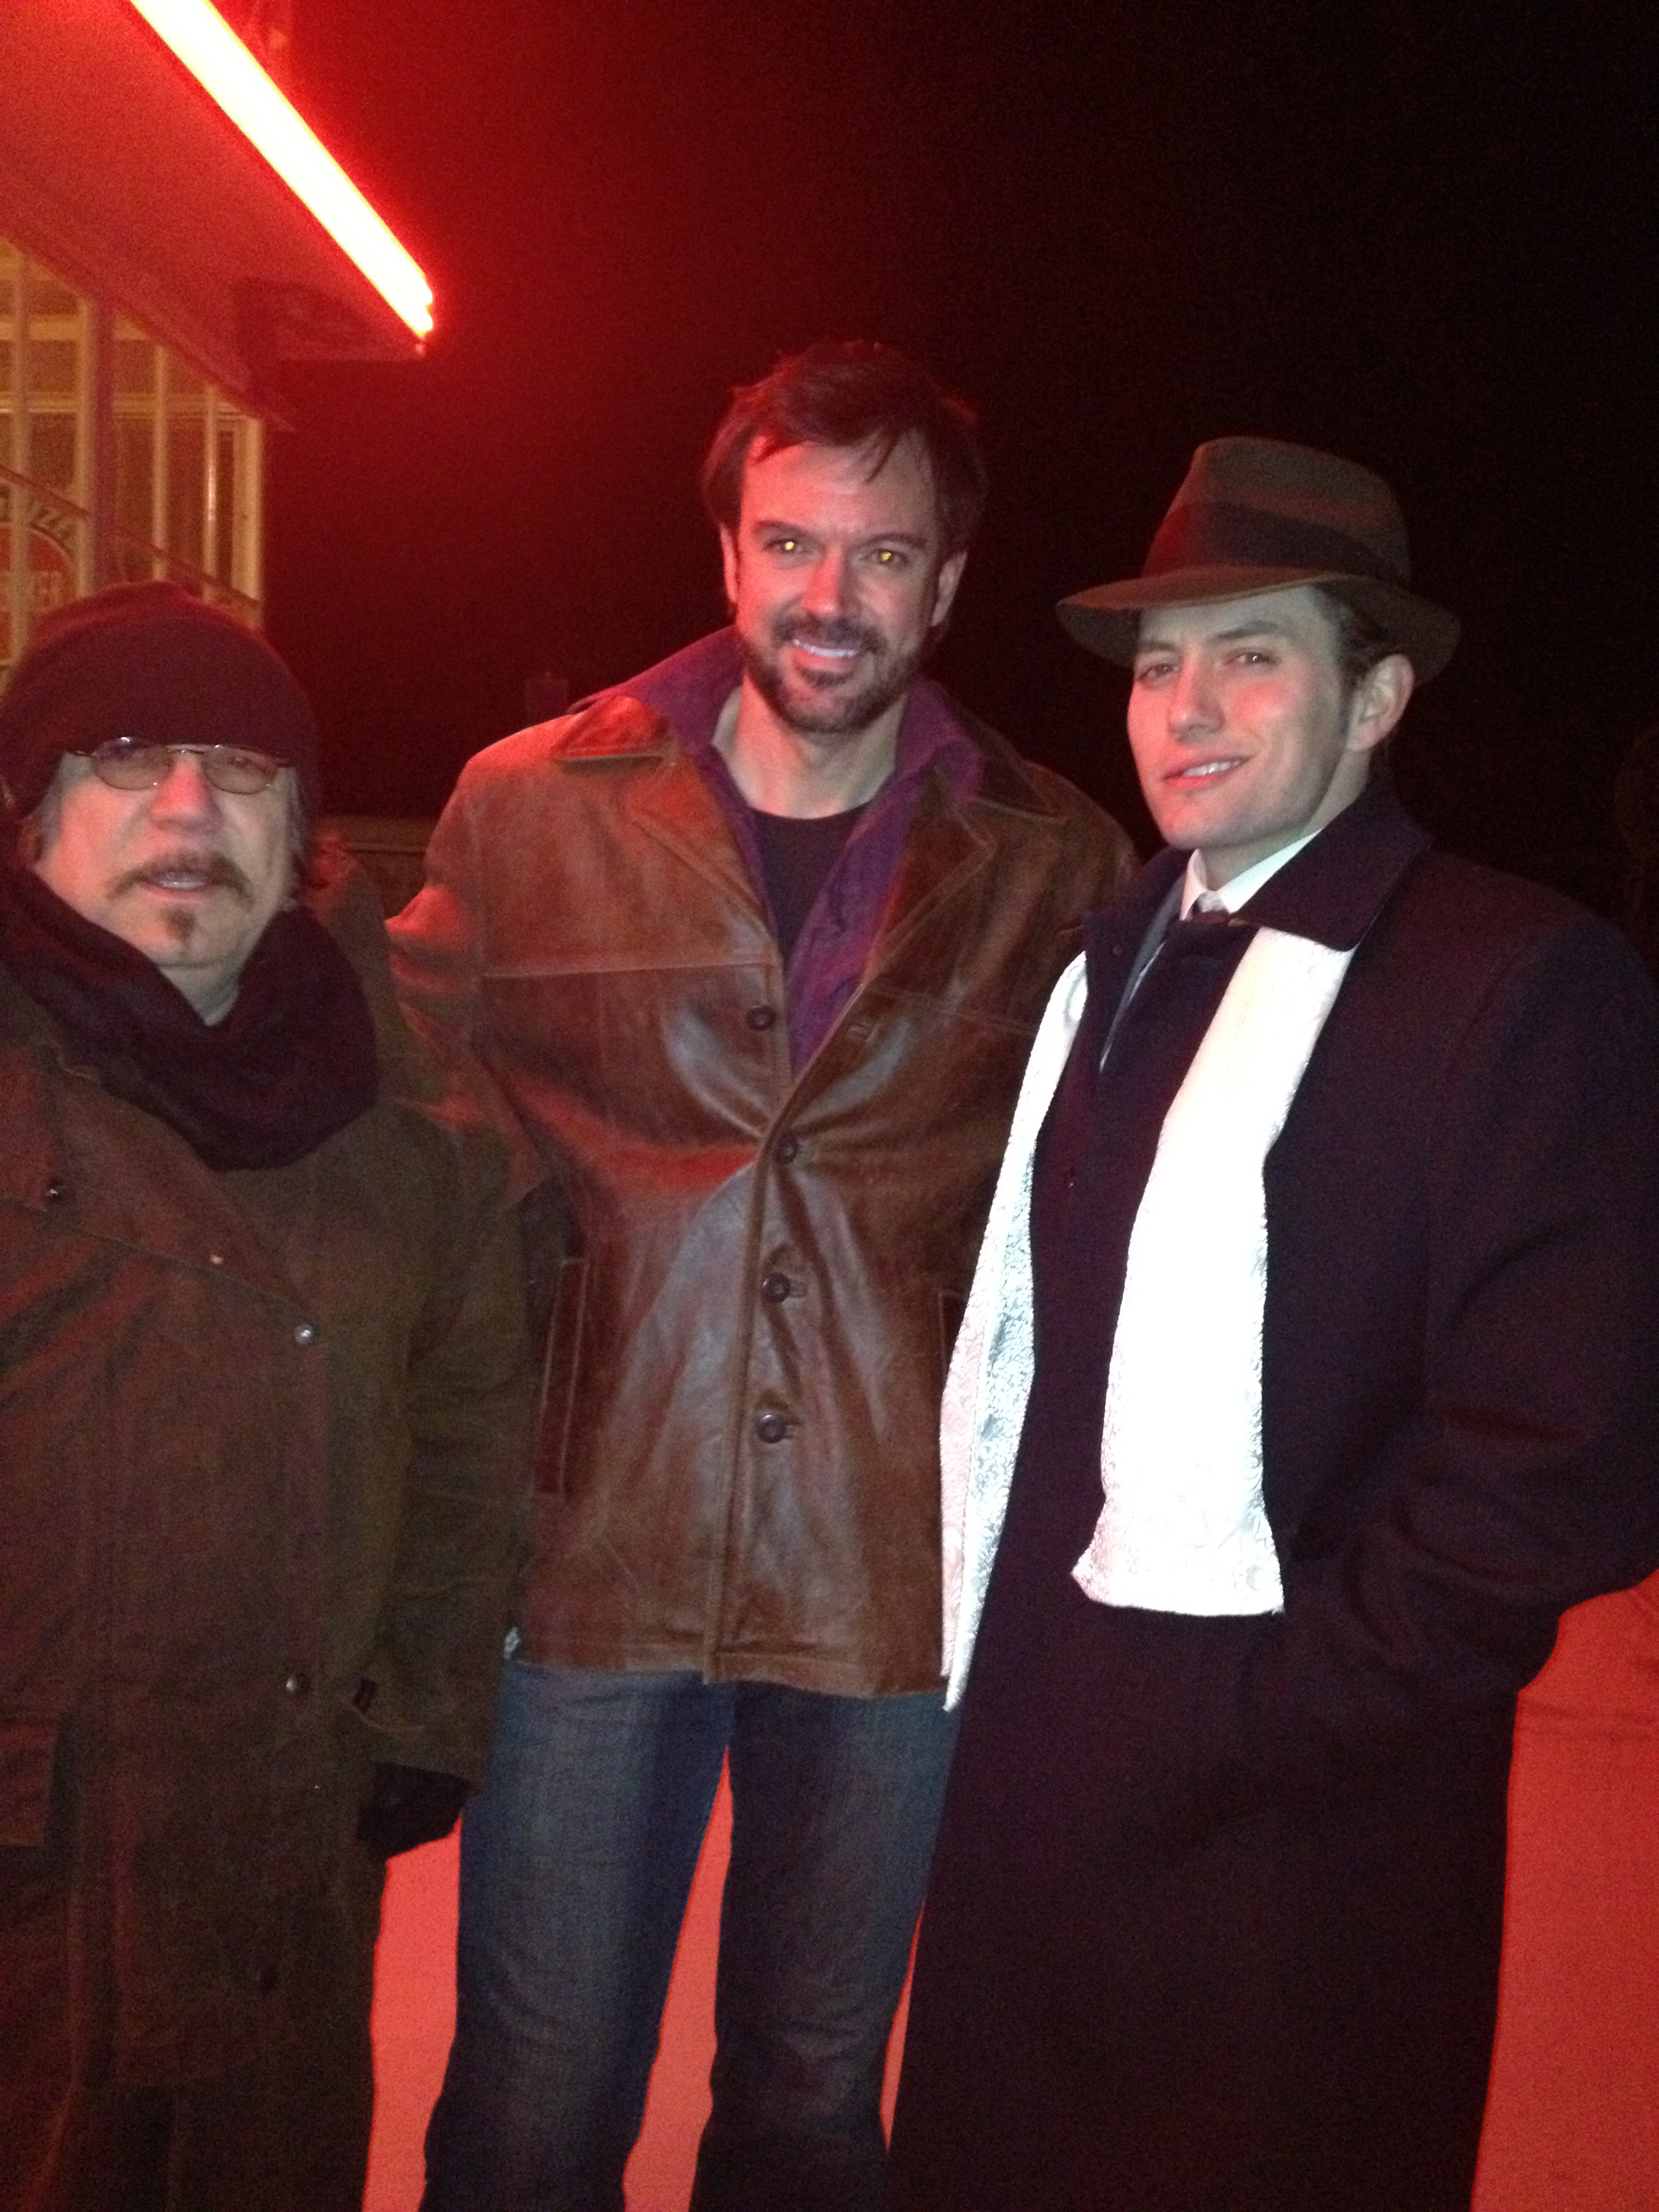 Eric St. John with Director Pece Dingo and actor Jackson Rathbone filming THE CONCERTO.